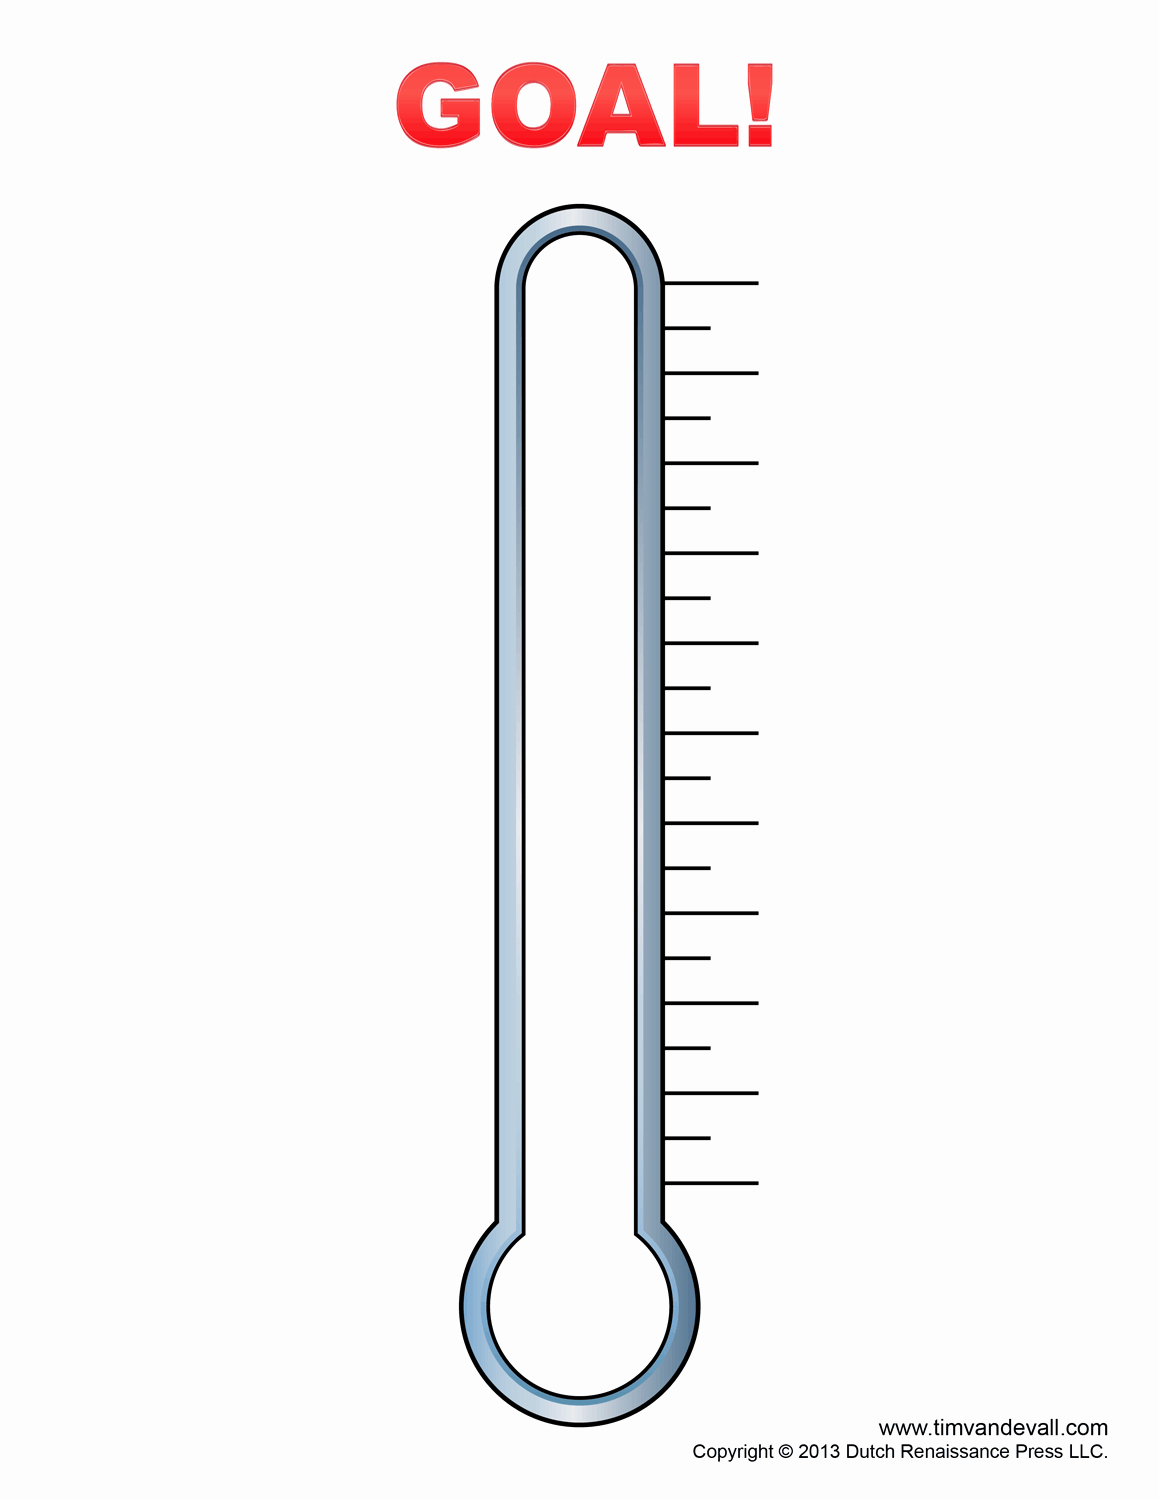 Fundraising thermometer Template Powerpoint Unique Fundraising thermometer Templates for Fundraising events